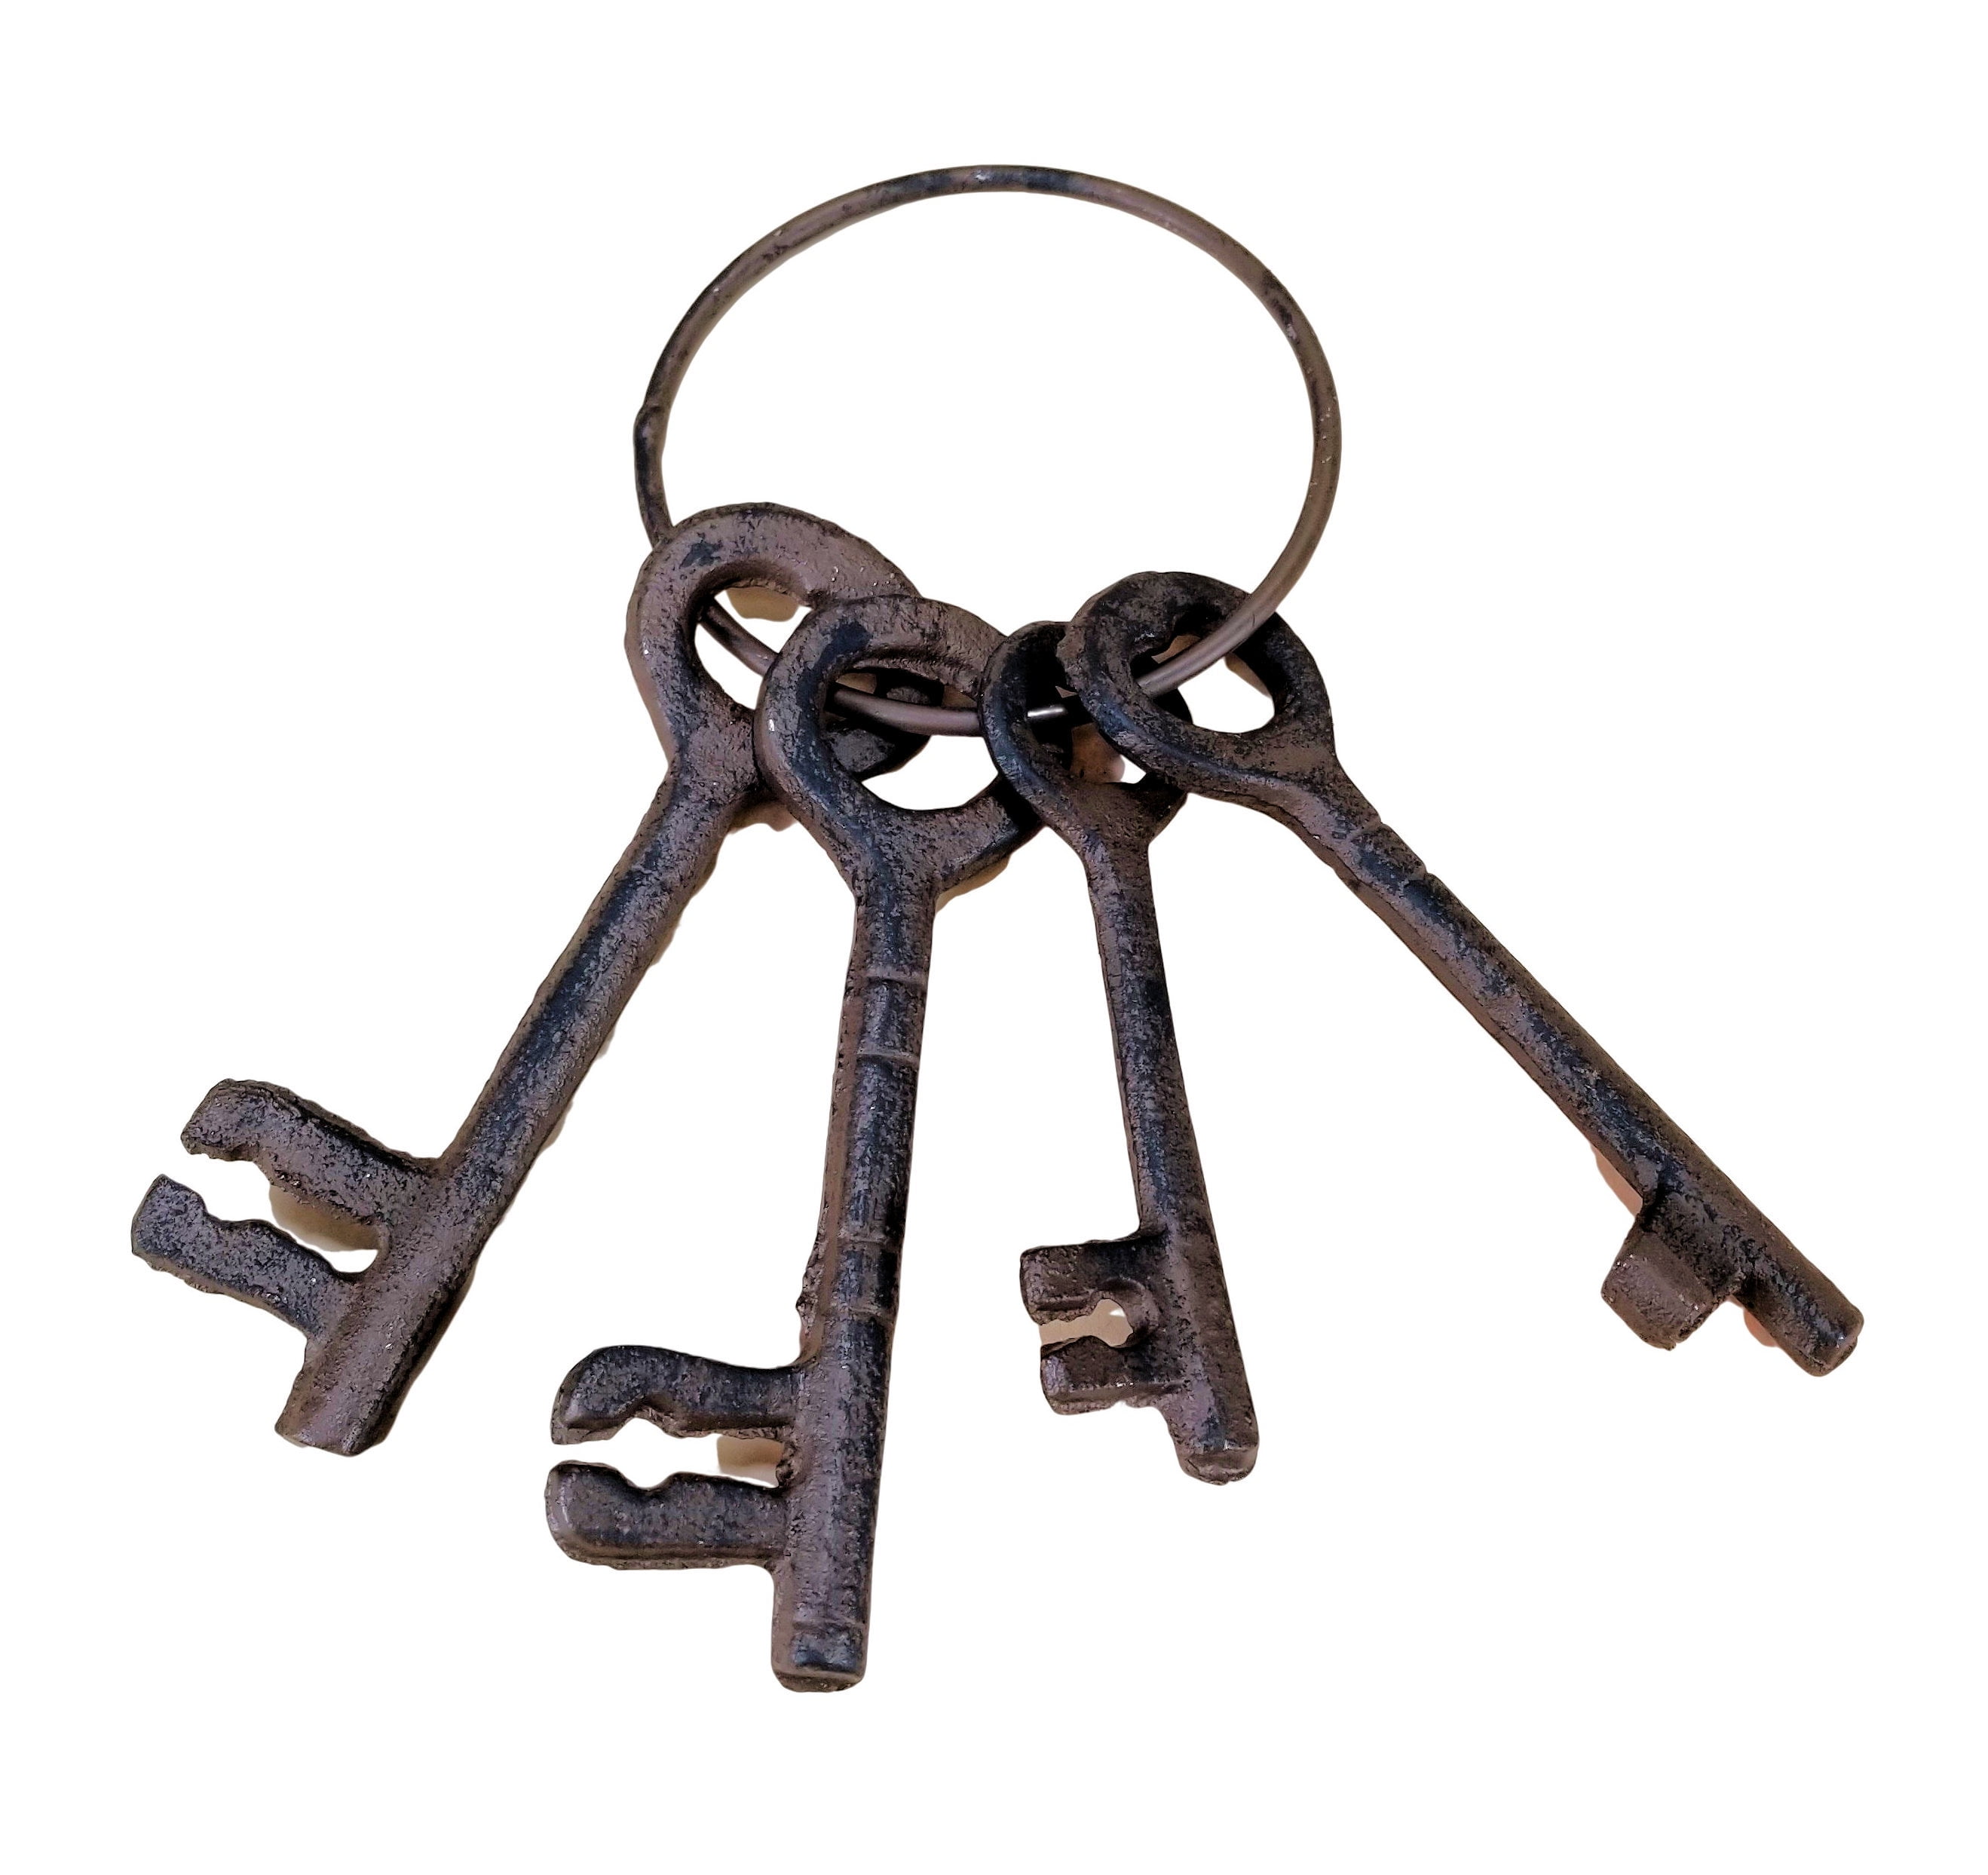 LARGE BUNCH RUSTY OLD VINTAGE KEYS ON KEY RING WITH HANGING HOOK HOME & GARDEN 